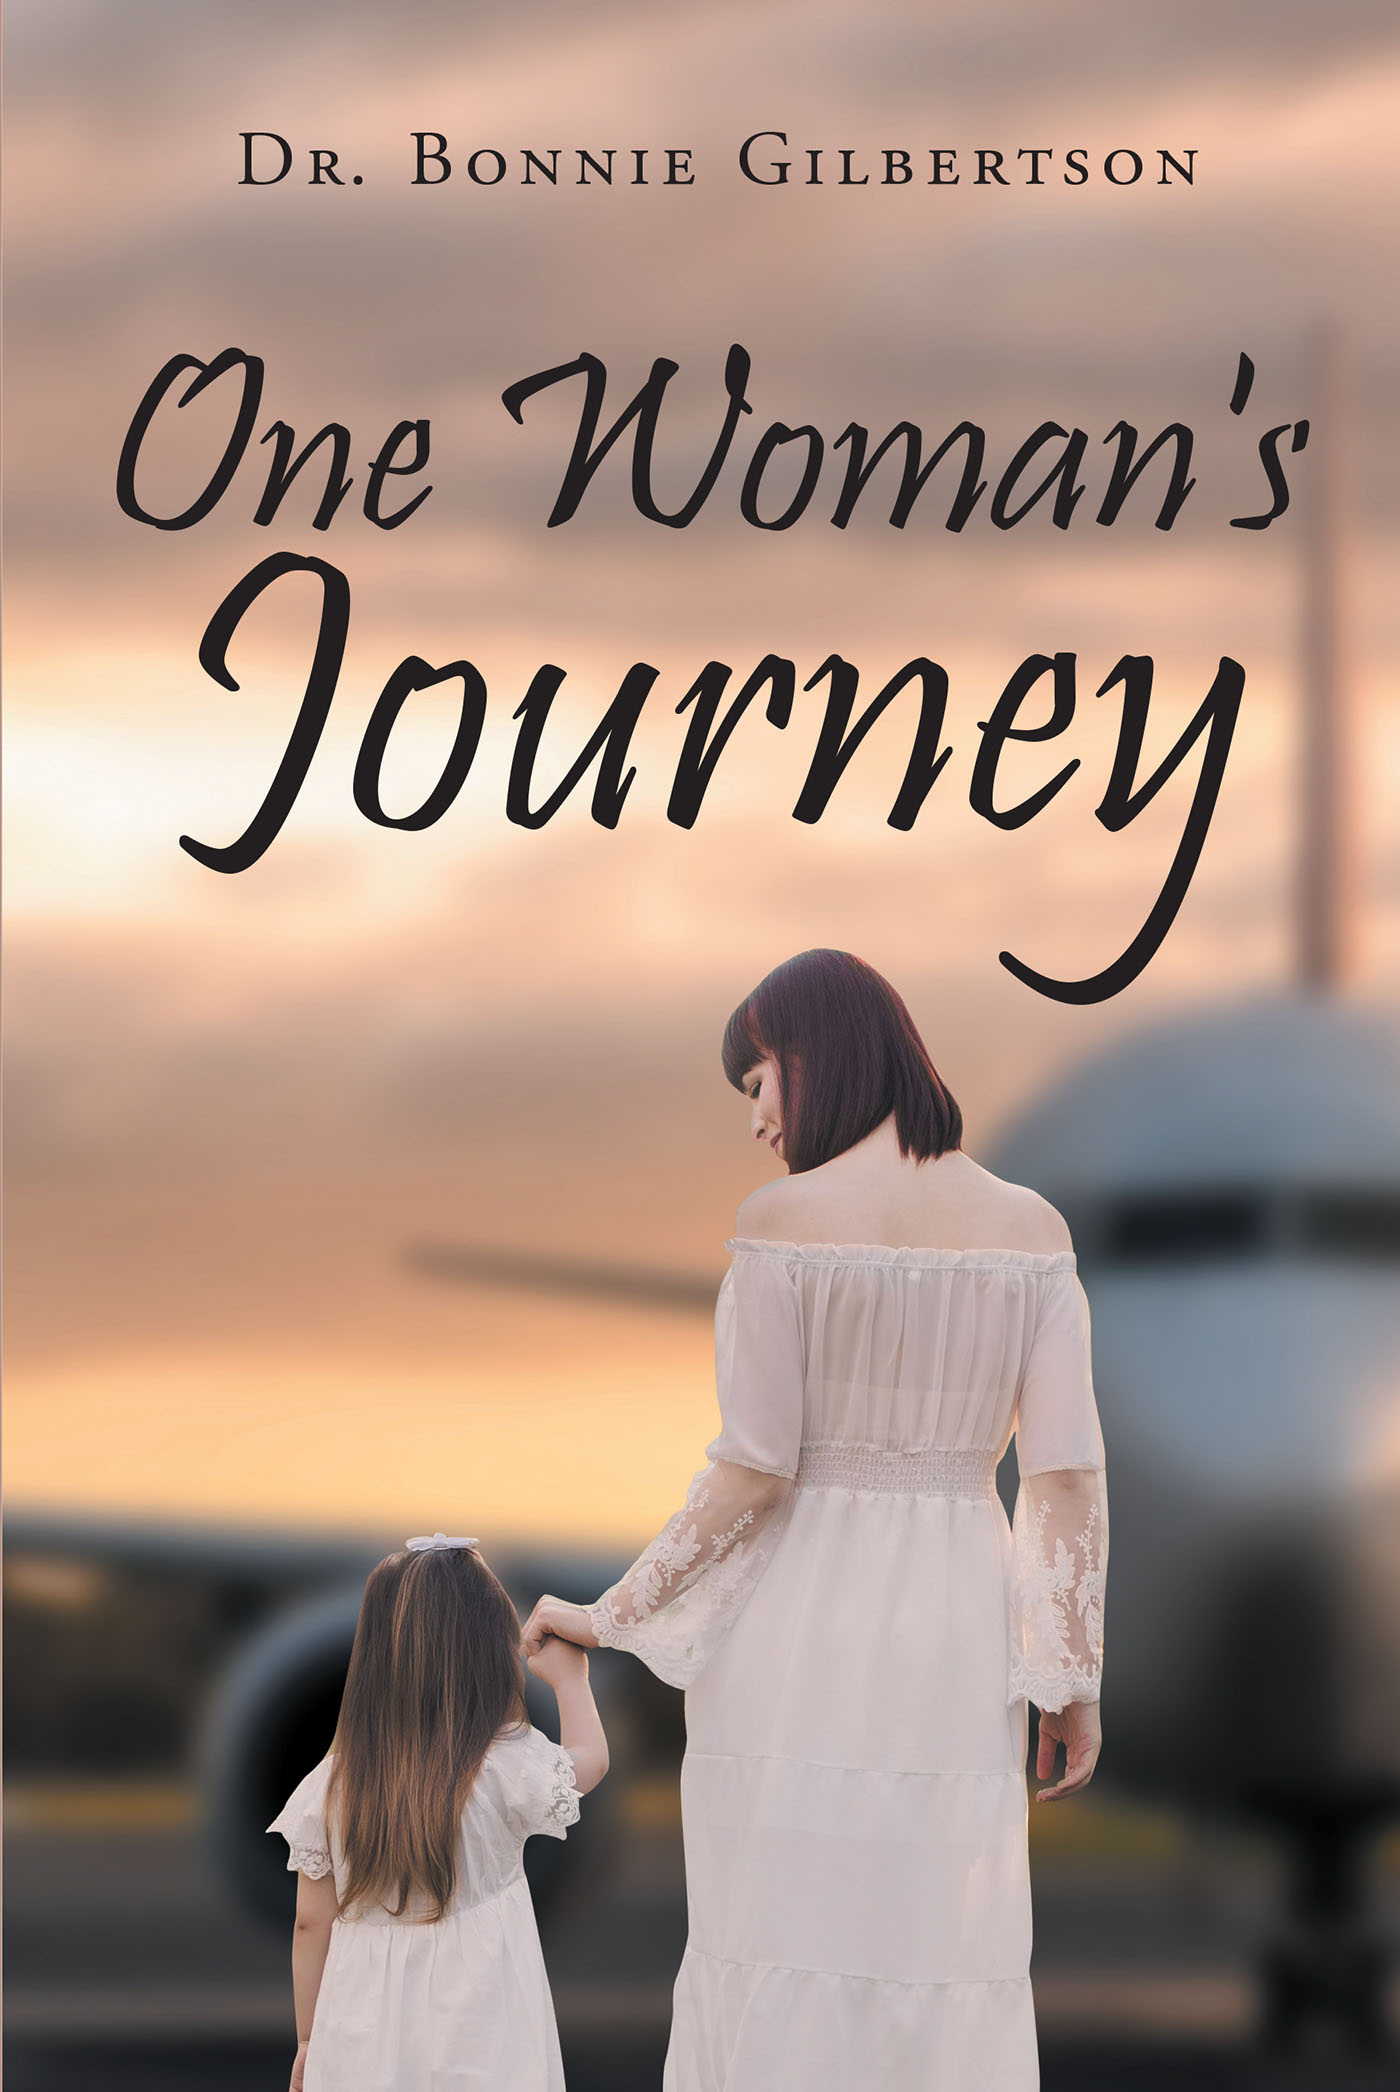 Author Dr. Bonnie Gilbertson’s New Book, "One Woman’s Journey," is the Story of a Woman’s Thrilling Adventures in the Philippine Islands